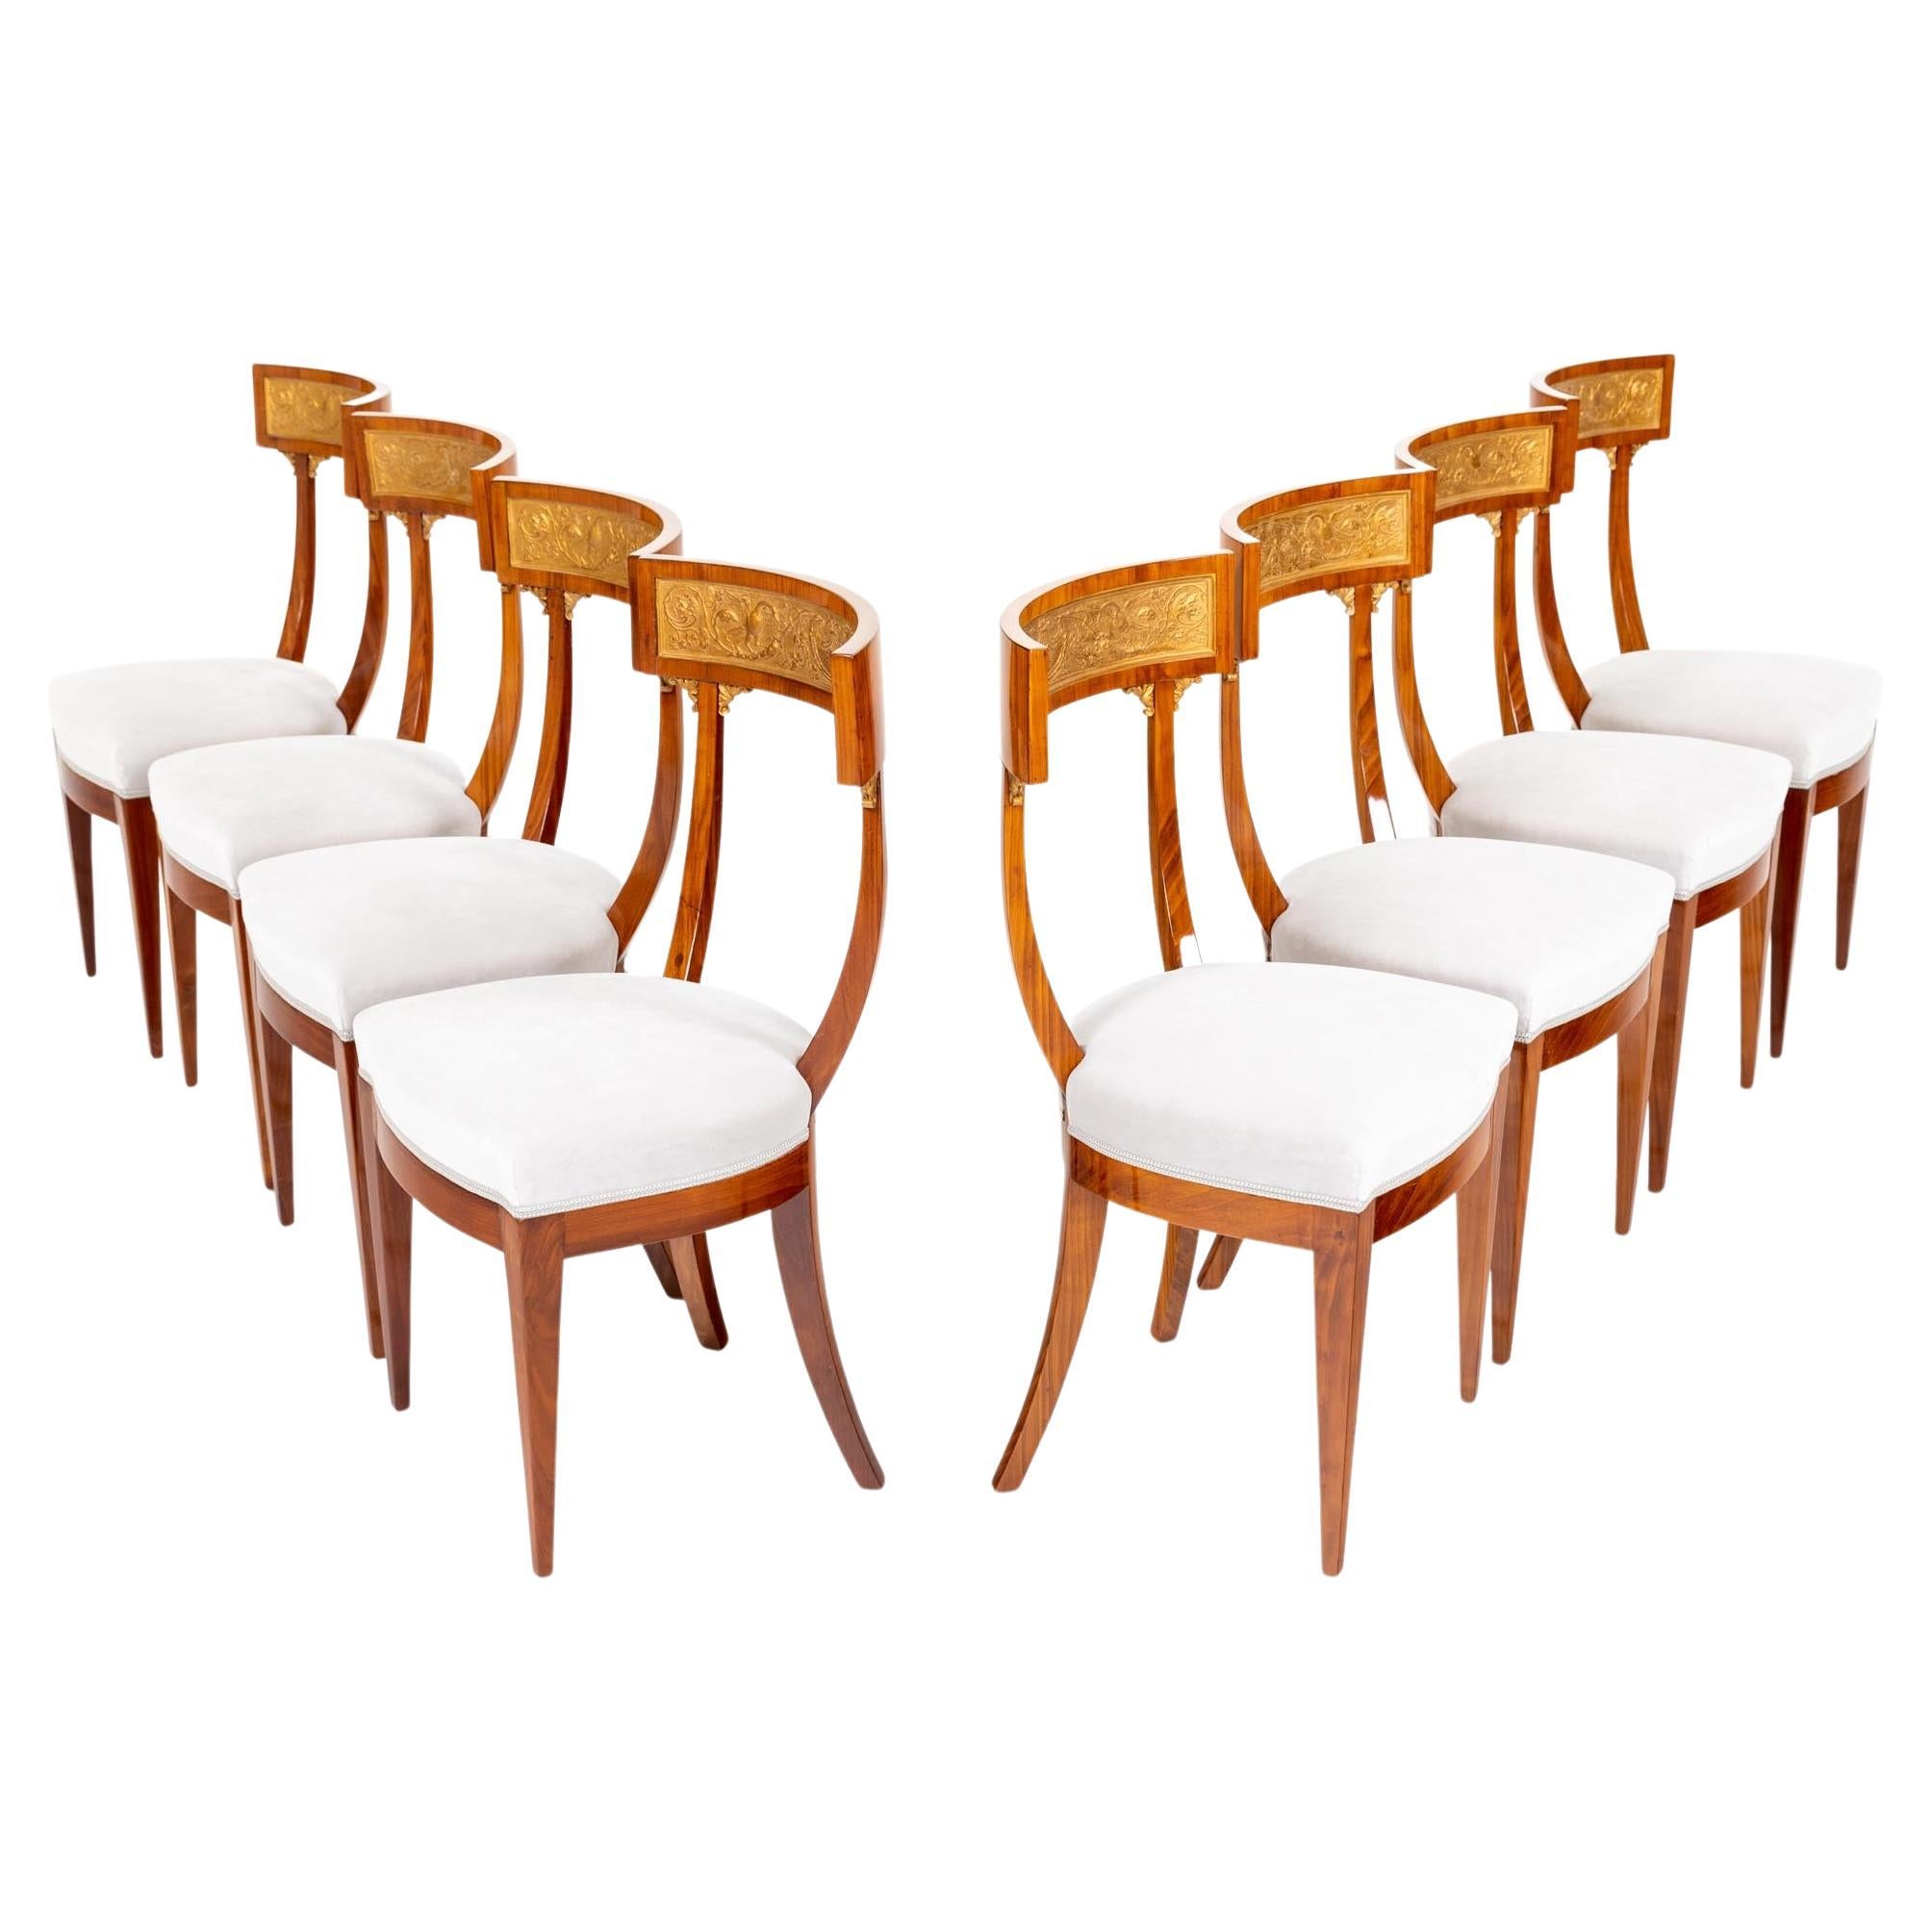 Eight Neoclassical Dining Chairs in Cherry Wood, Tuscany, 19th Century For Sale